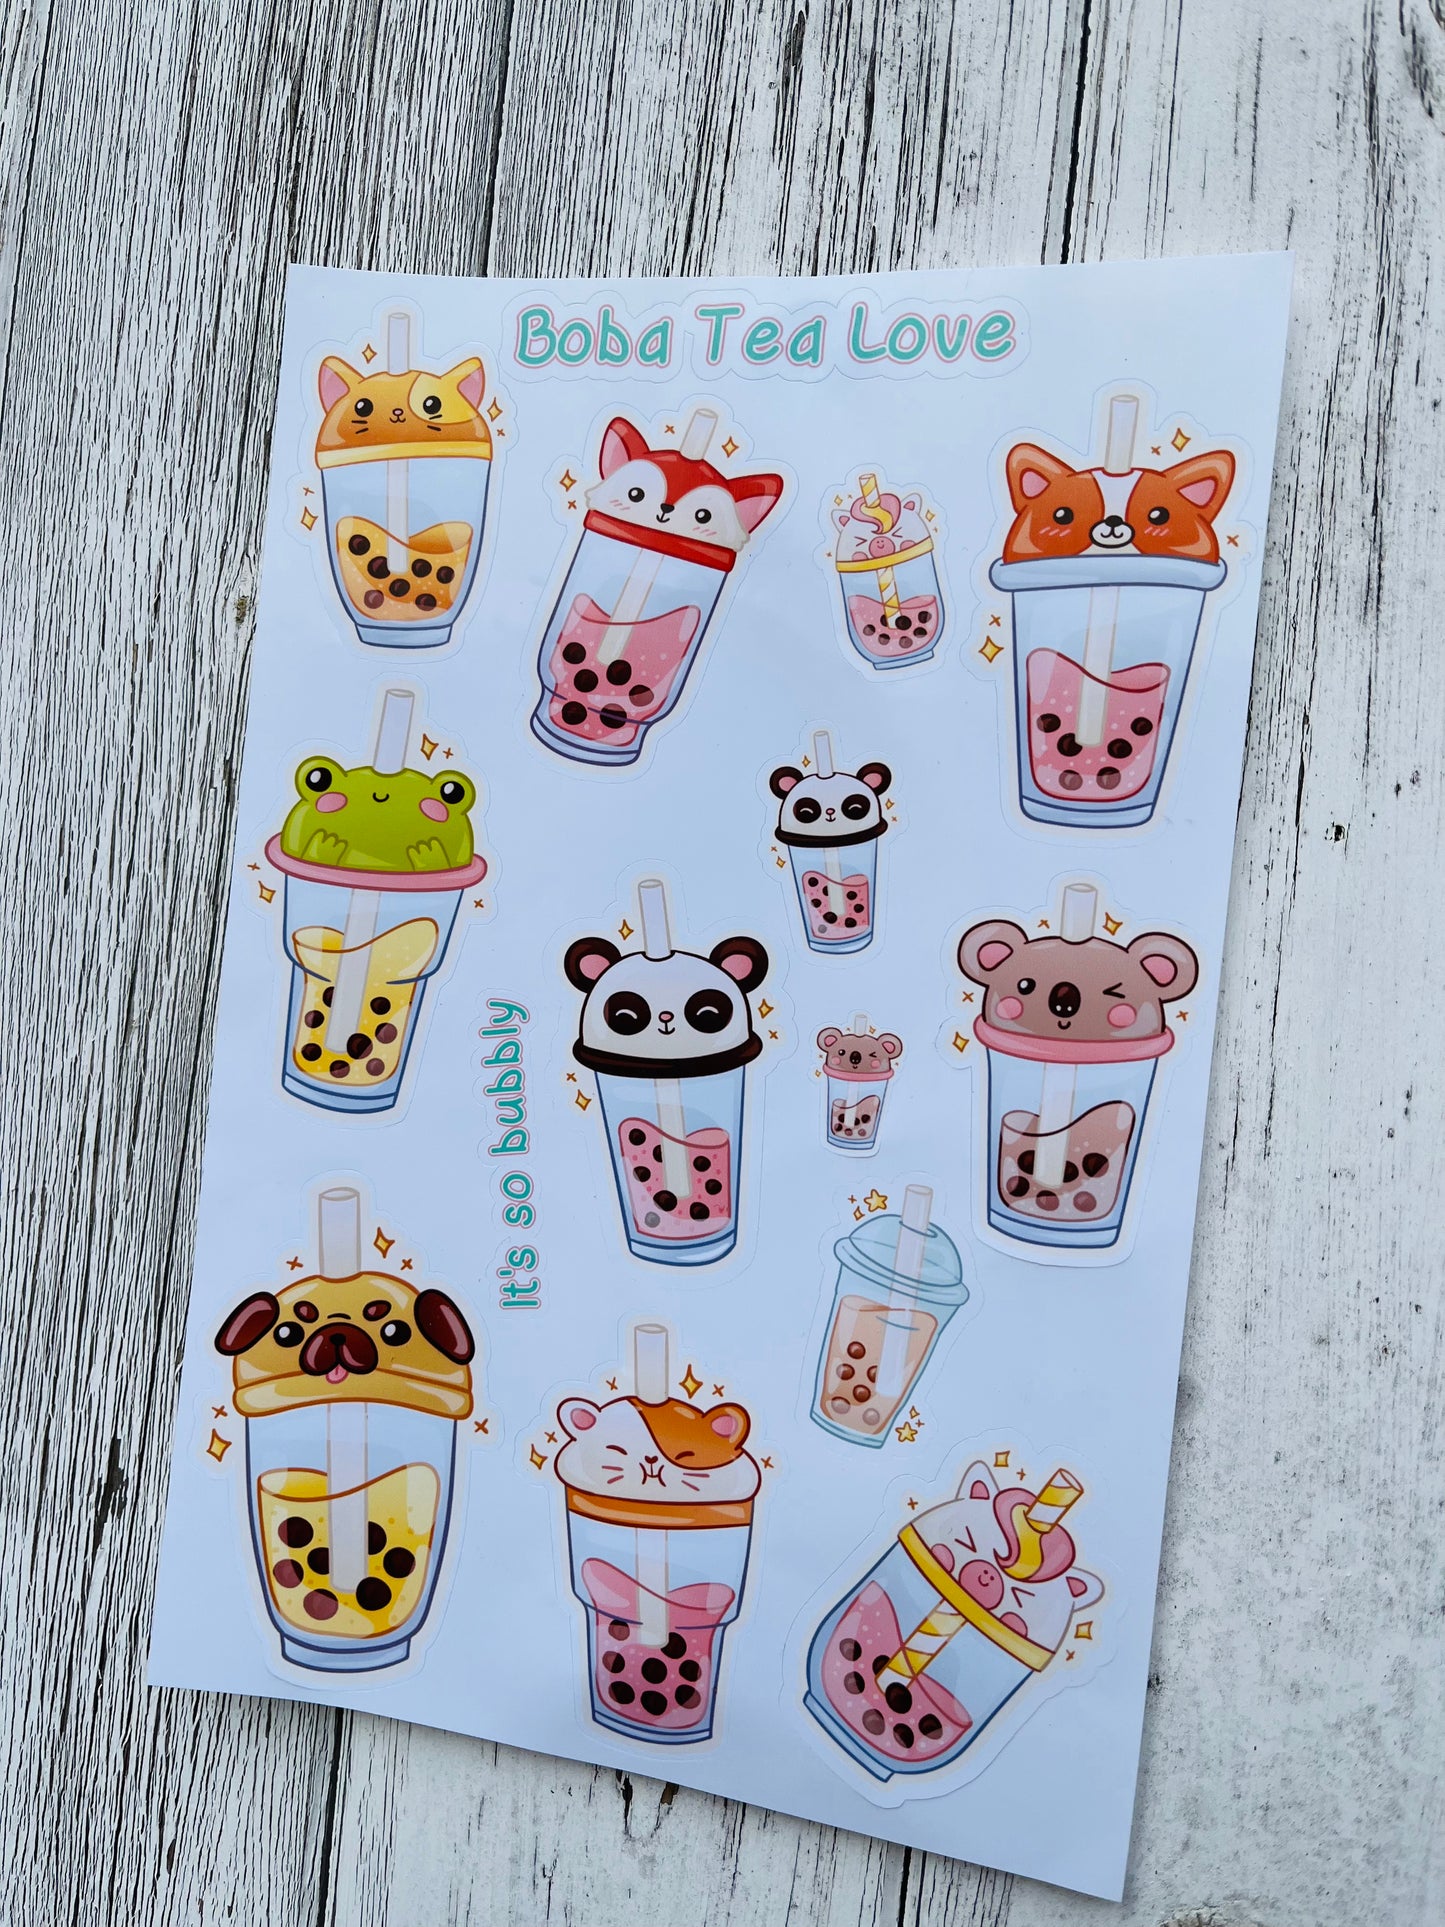 Bubble Tea Gift Set!  Any bubble tea fans out there?! I have had